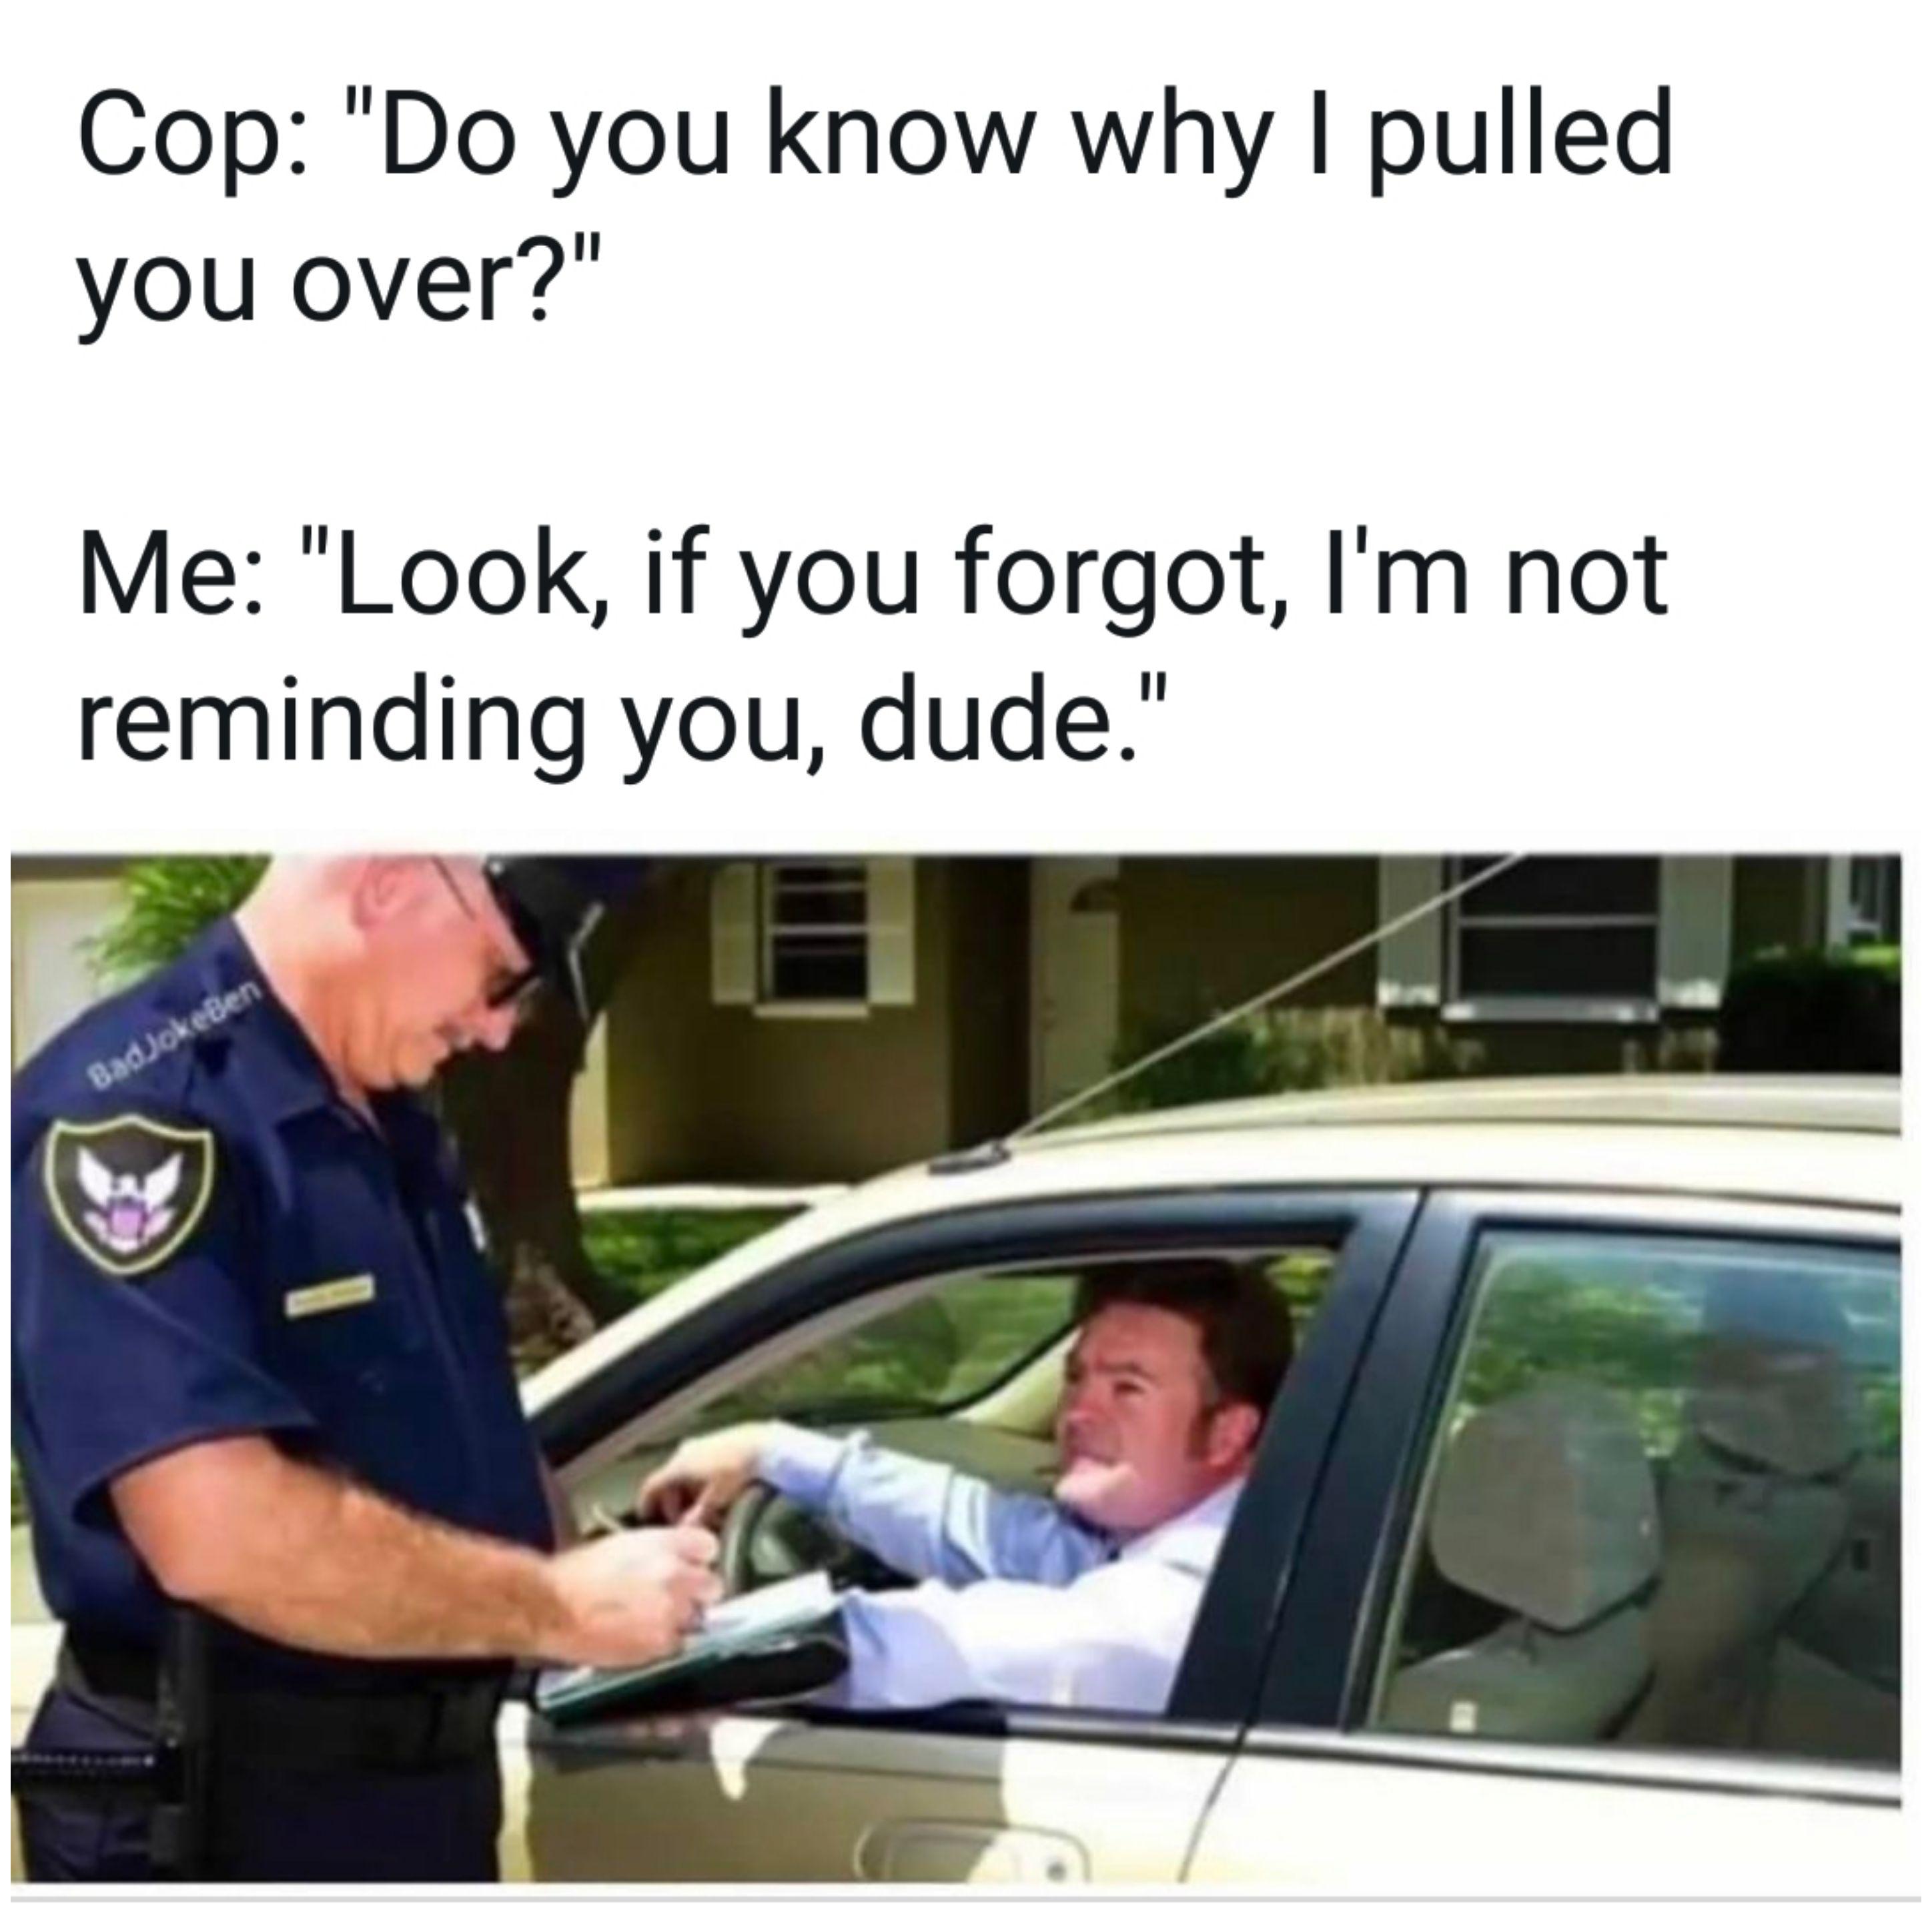 whose car is this meme - Cop "Do you know why I pulled you over?" Me "Look, if you forgot, I'm not reminding you, dude." Bad Jokelen